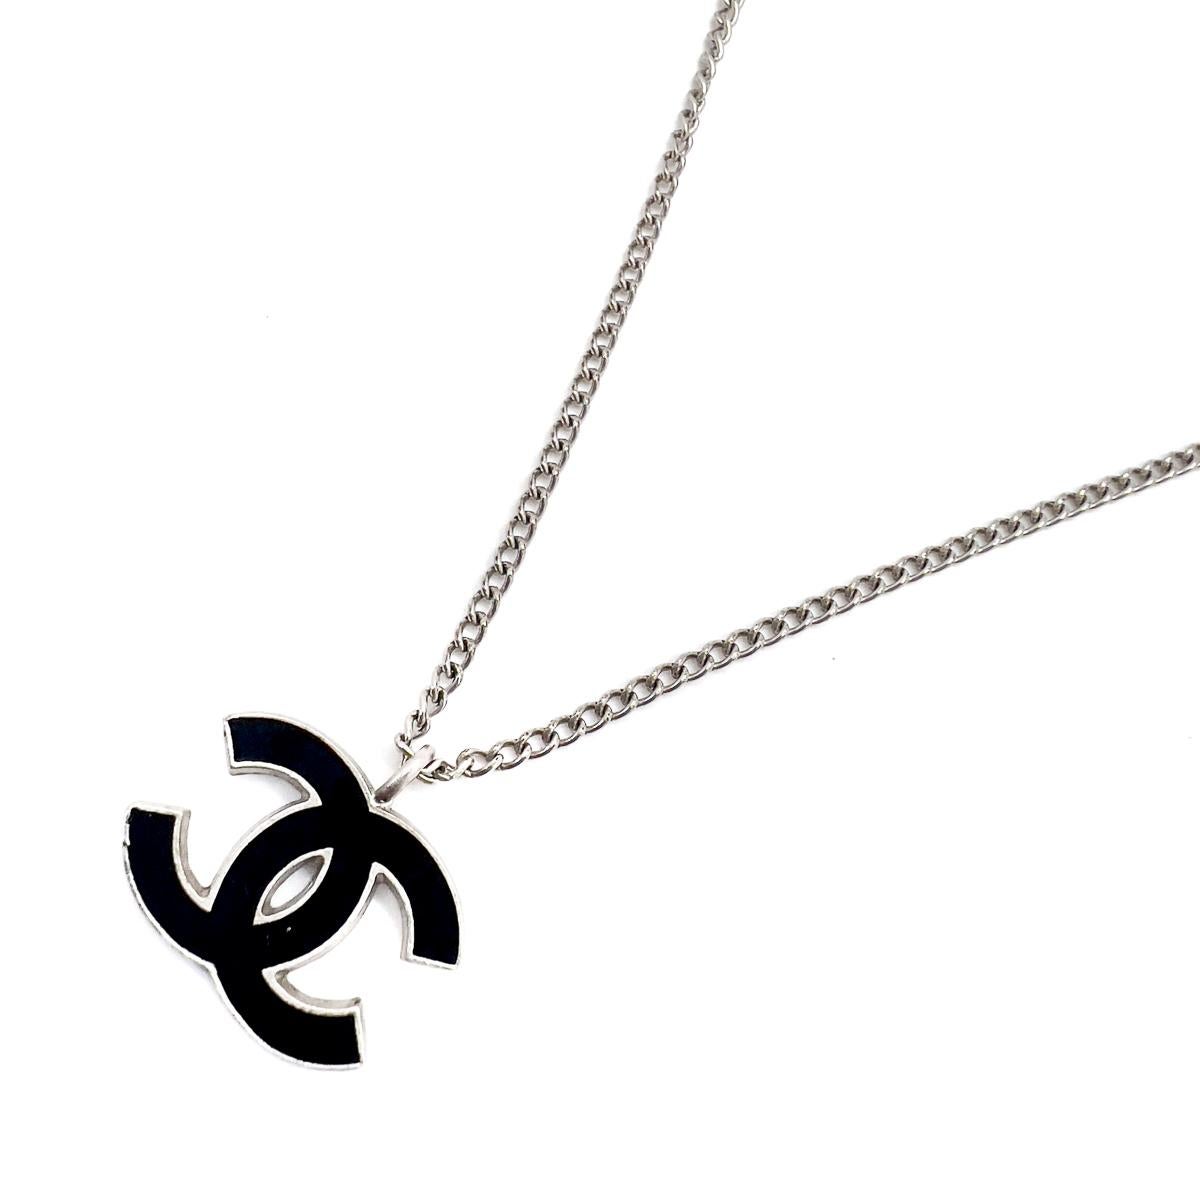 An iconic Vintage Chanel CC Logo Necklace from the 2006 Spring collection. Elevate your look with this classic from the House.

Vintage Condition: Very good without damage or noteworthy wear.
Signed: Chanel, 2006
Materials: rhodium plated metal,